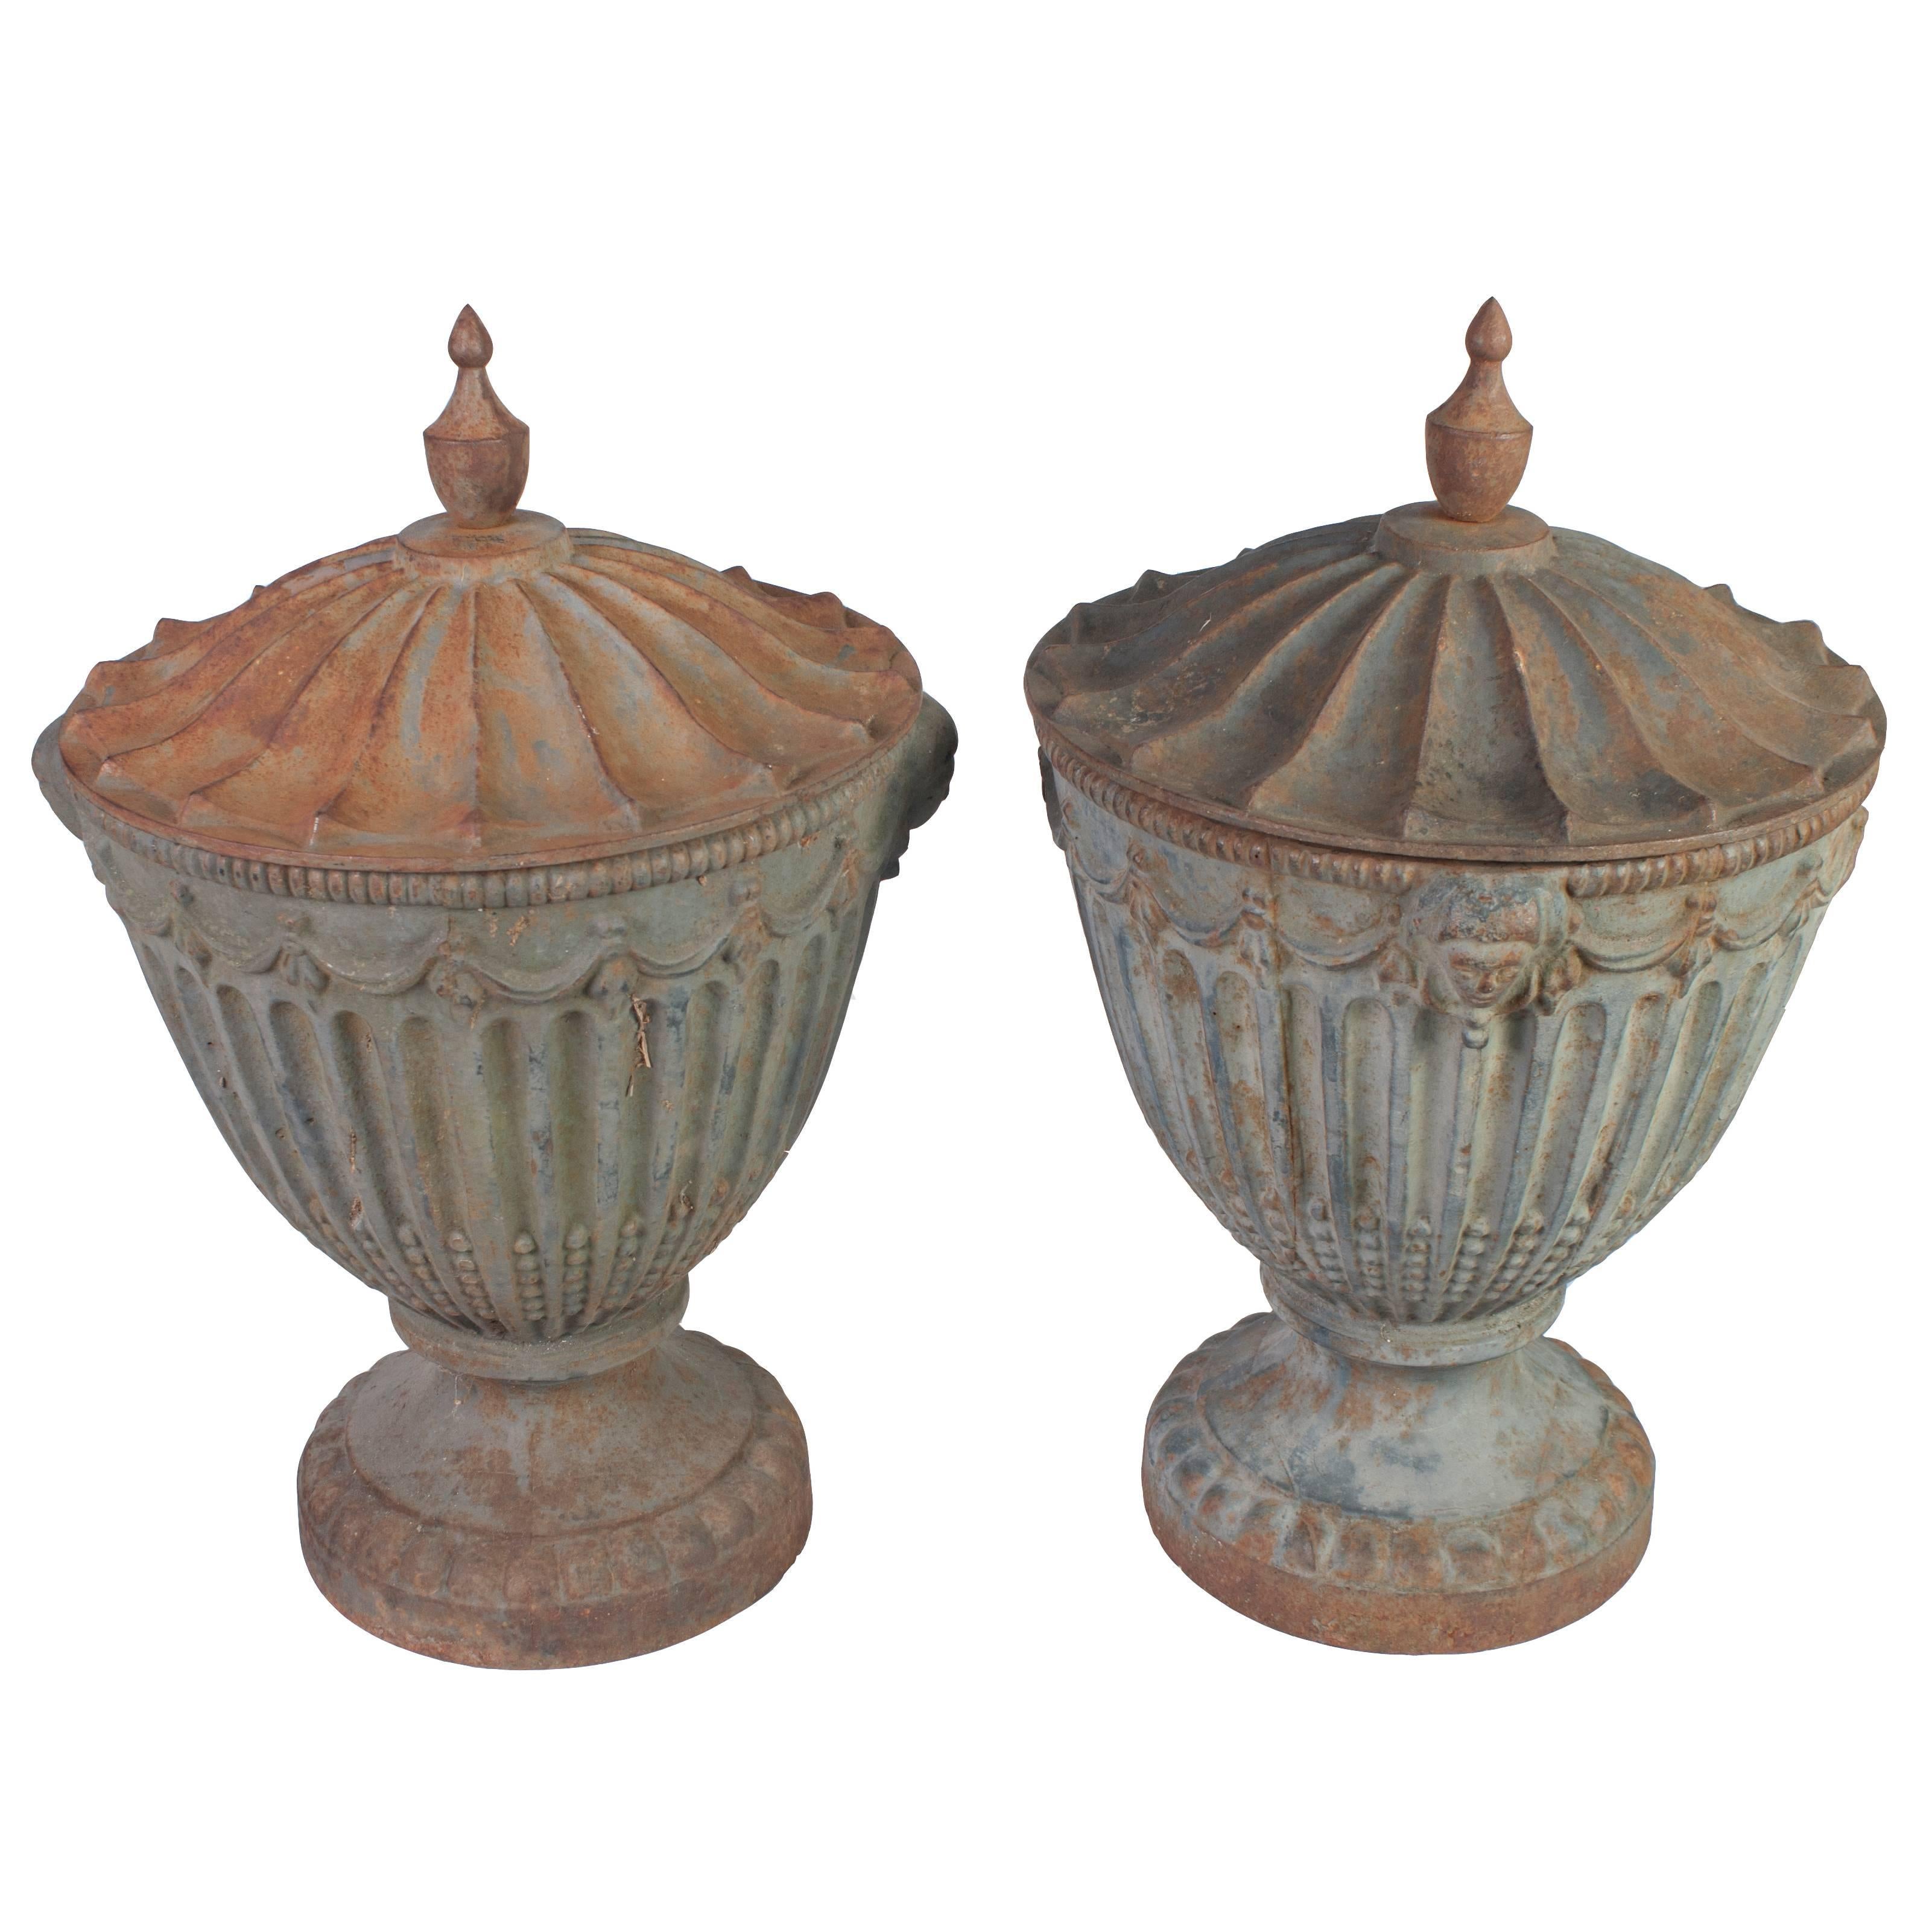 Pair of Painted Covered Urns